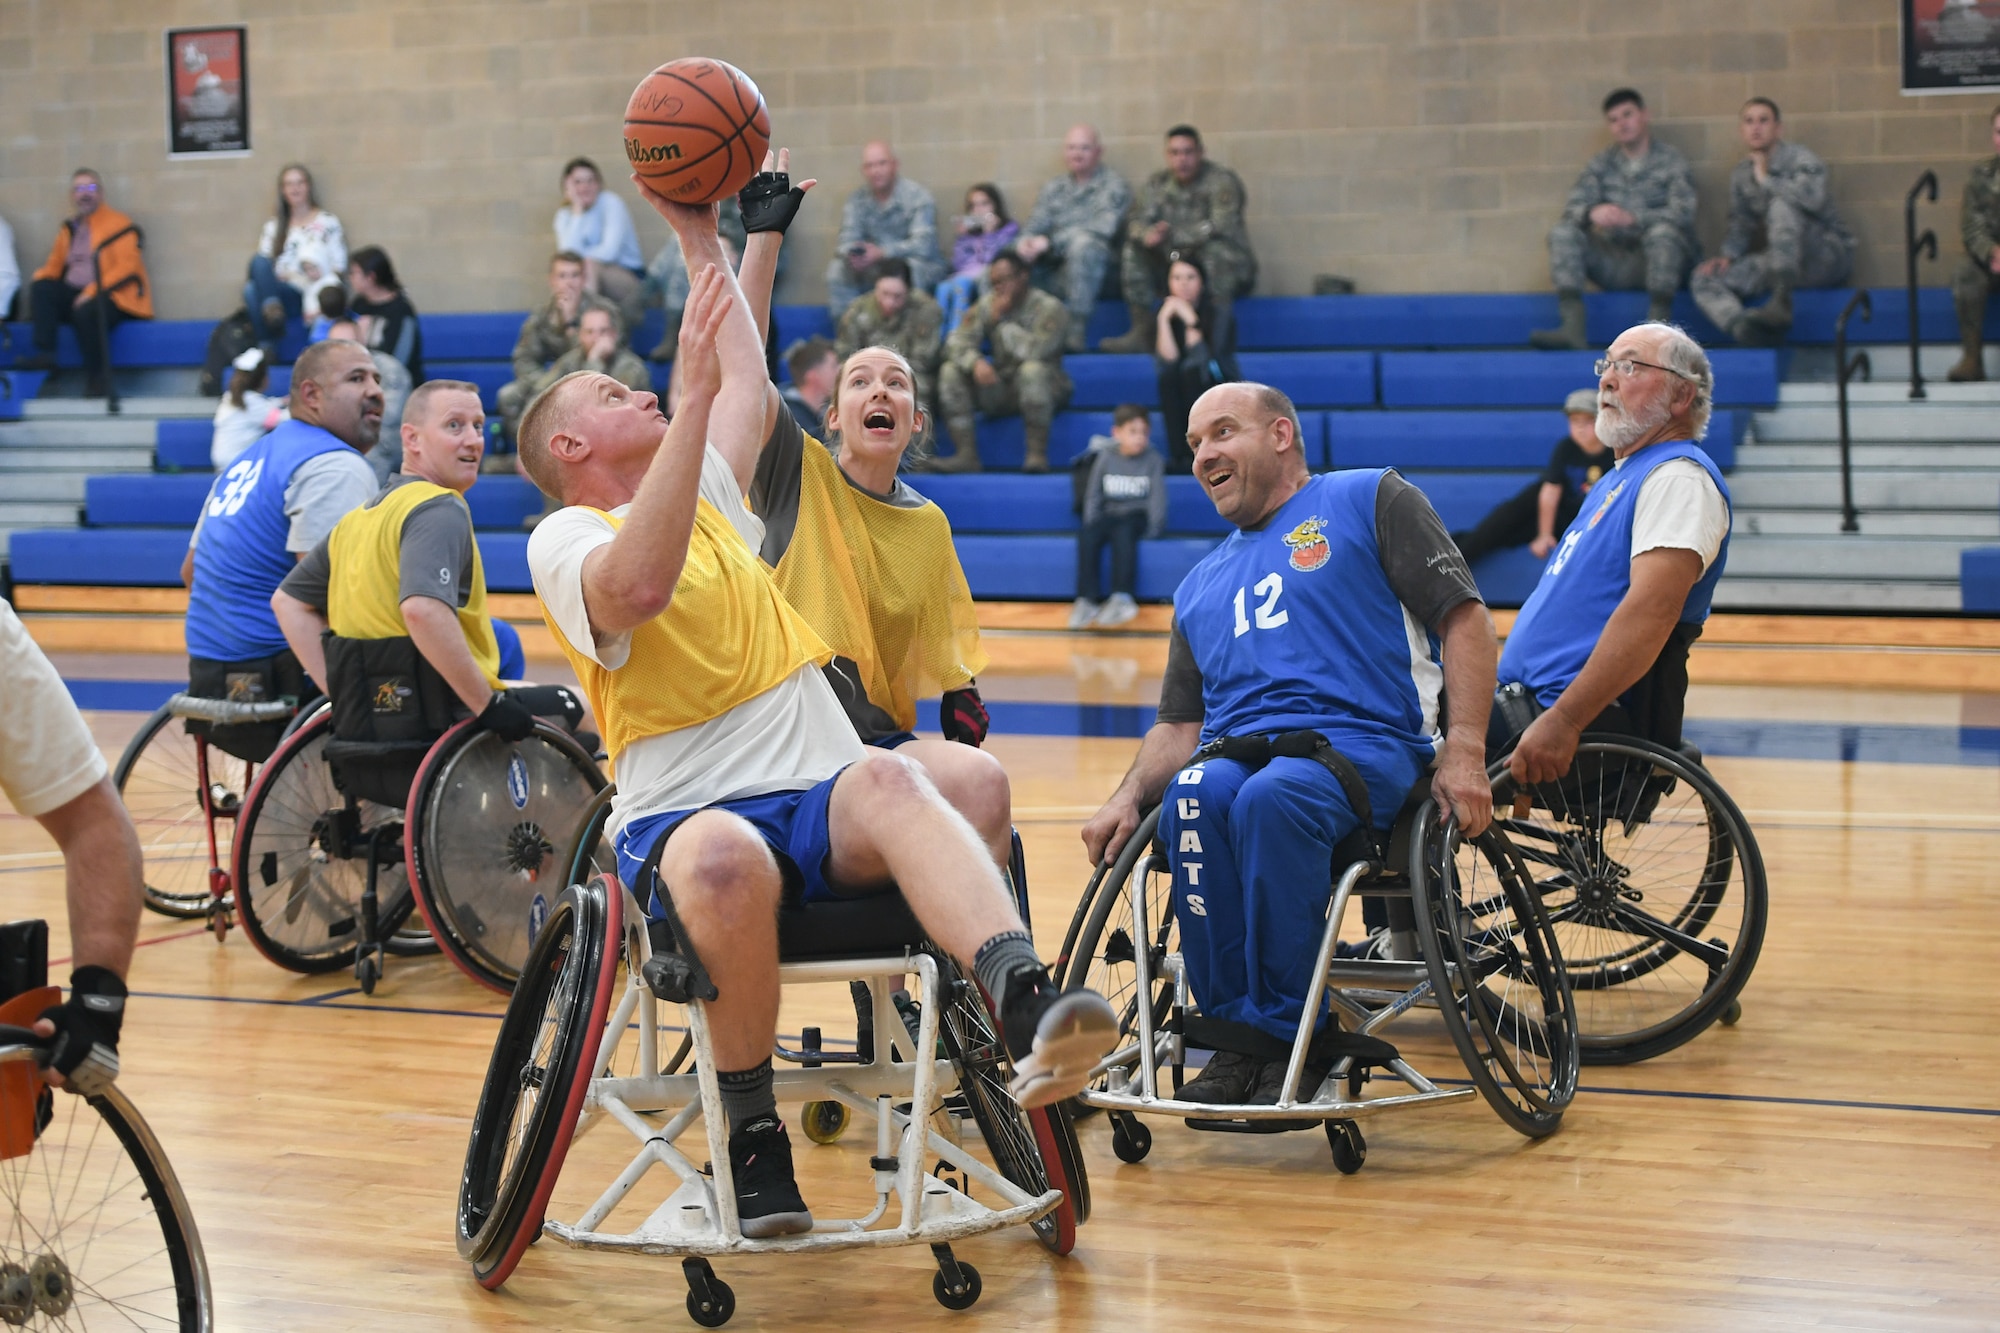 Team Hill players gain possession of the ball during a wheelchair basketball game Oct. 9, 2019 at Hill Air Force Base, Utah. Leaders from Hill's units faced off against the Ogden Wheelin' Wildcats, a semi-professional wheelchair basketball team, to celebrate National Disability Employment Awareness Month. (U.S. Air Force photo by Cynthia Griggs)